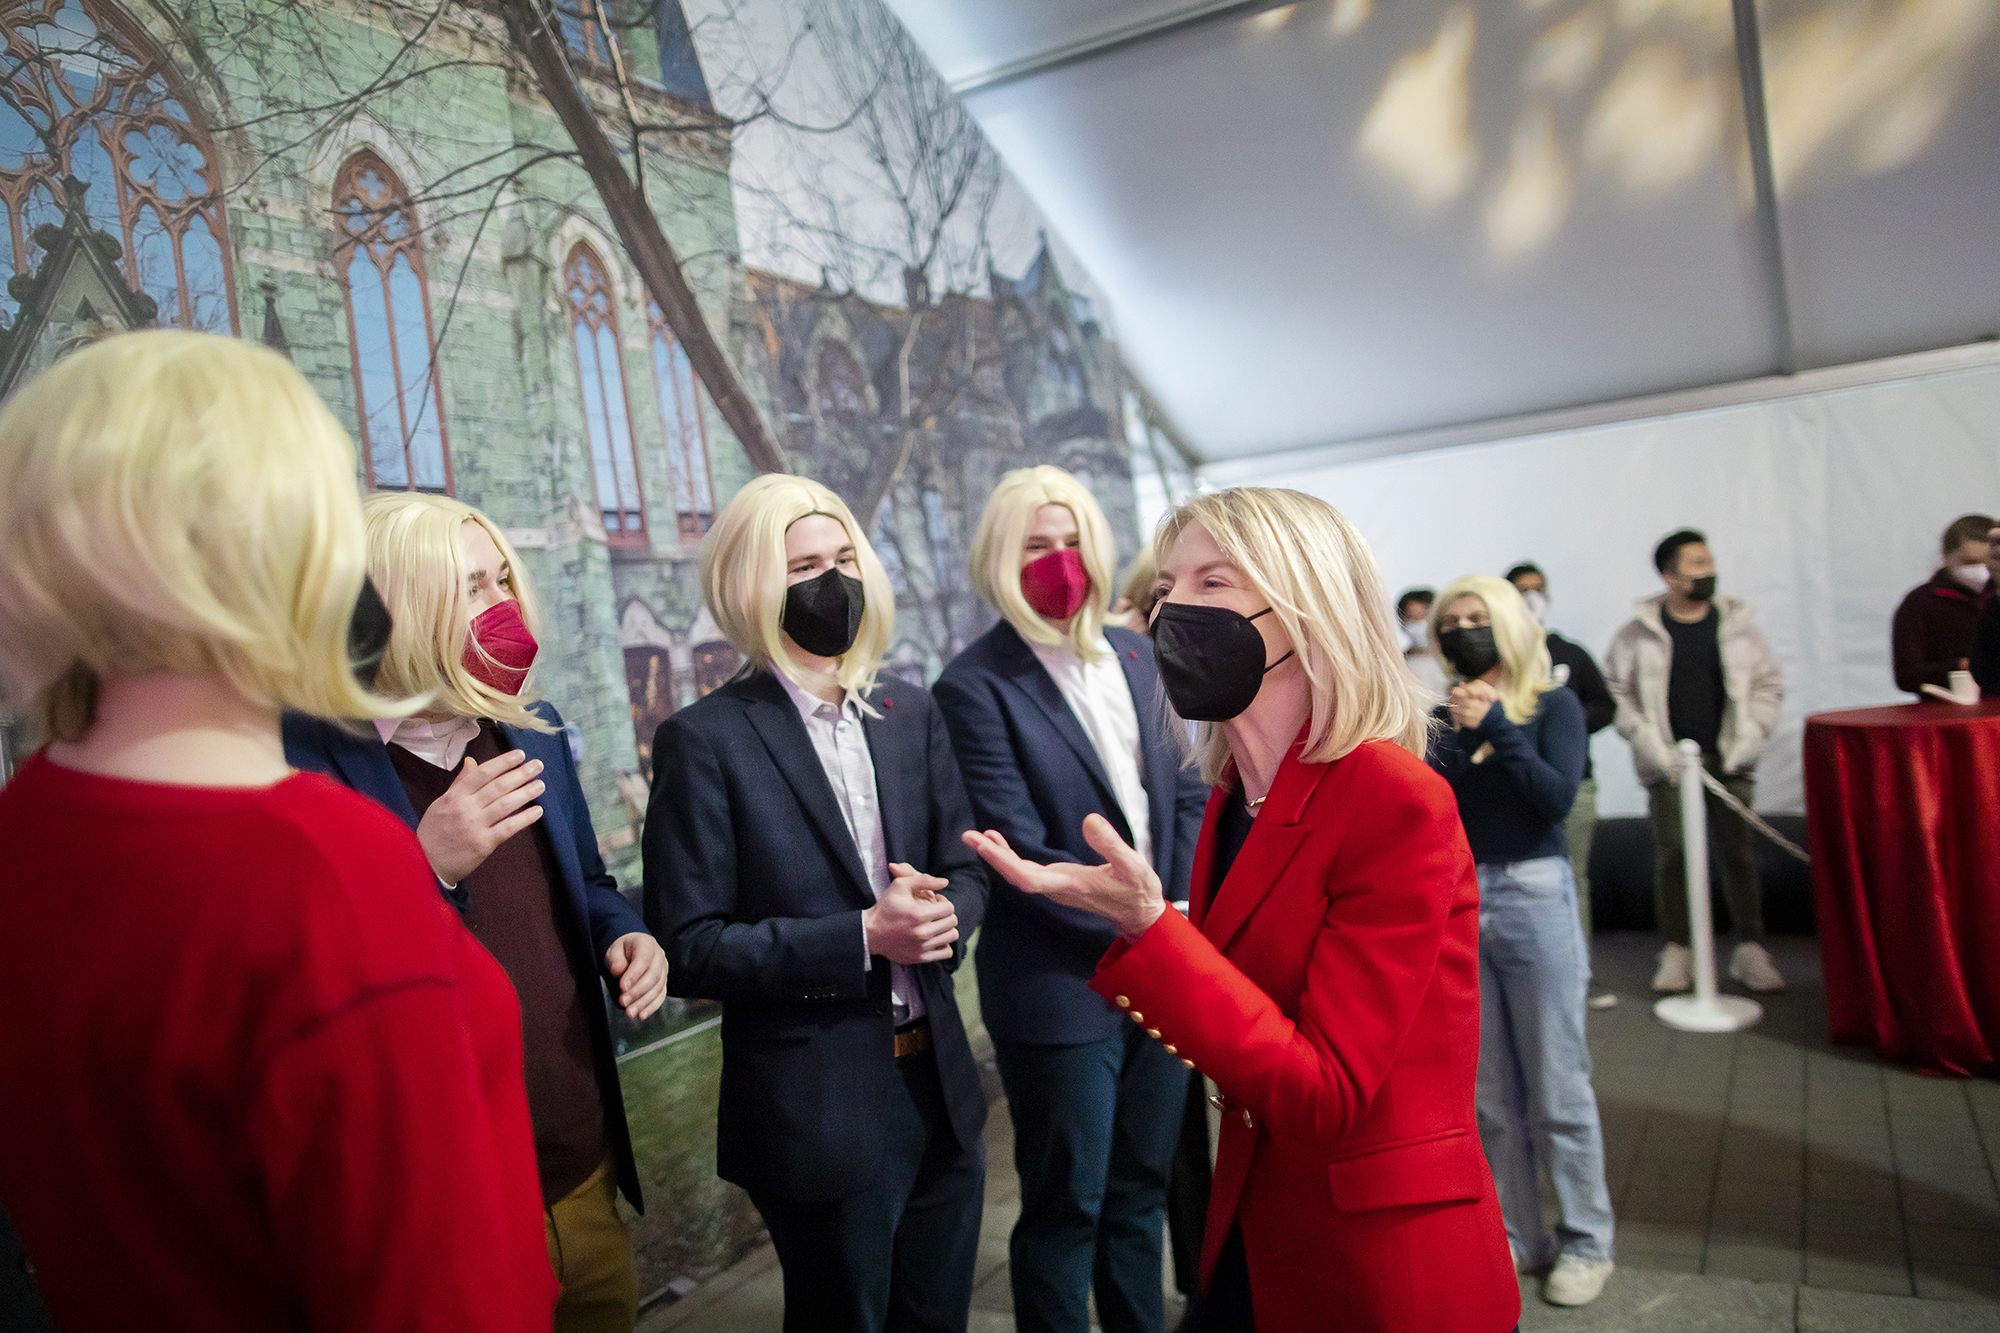 Penn President Amy Gutmann at a party talking with students wearing blonde wigs.